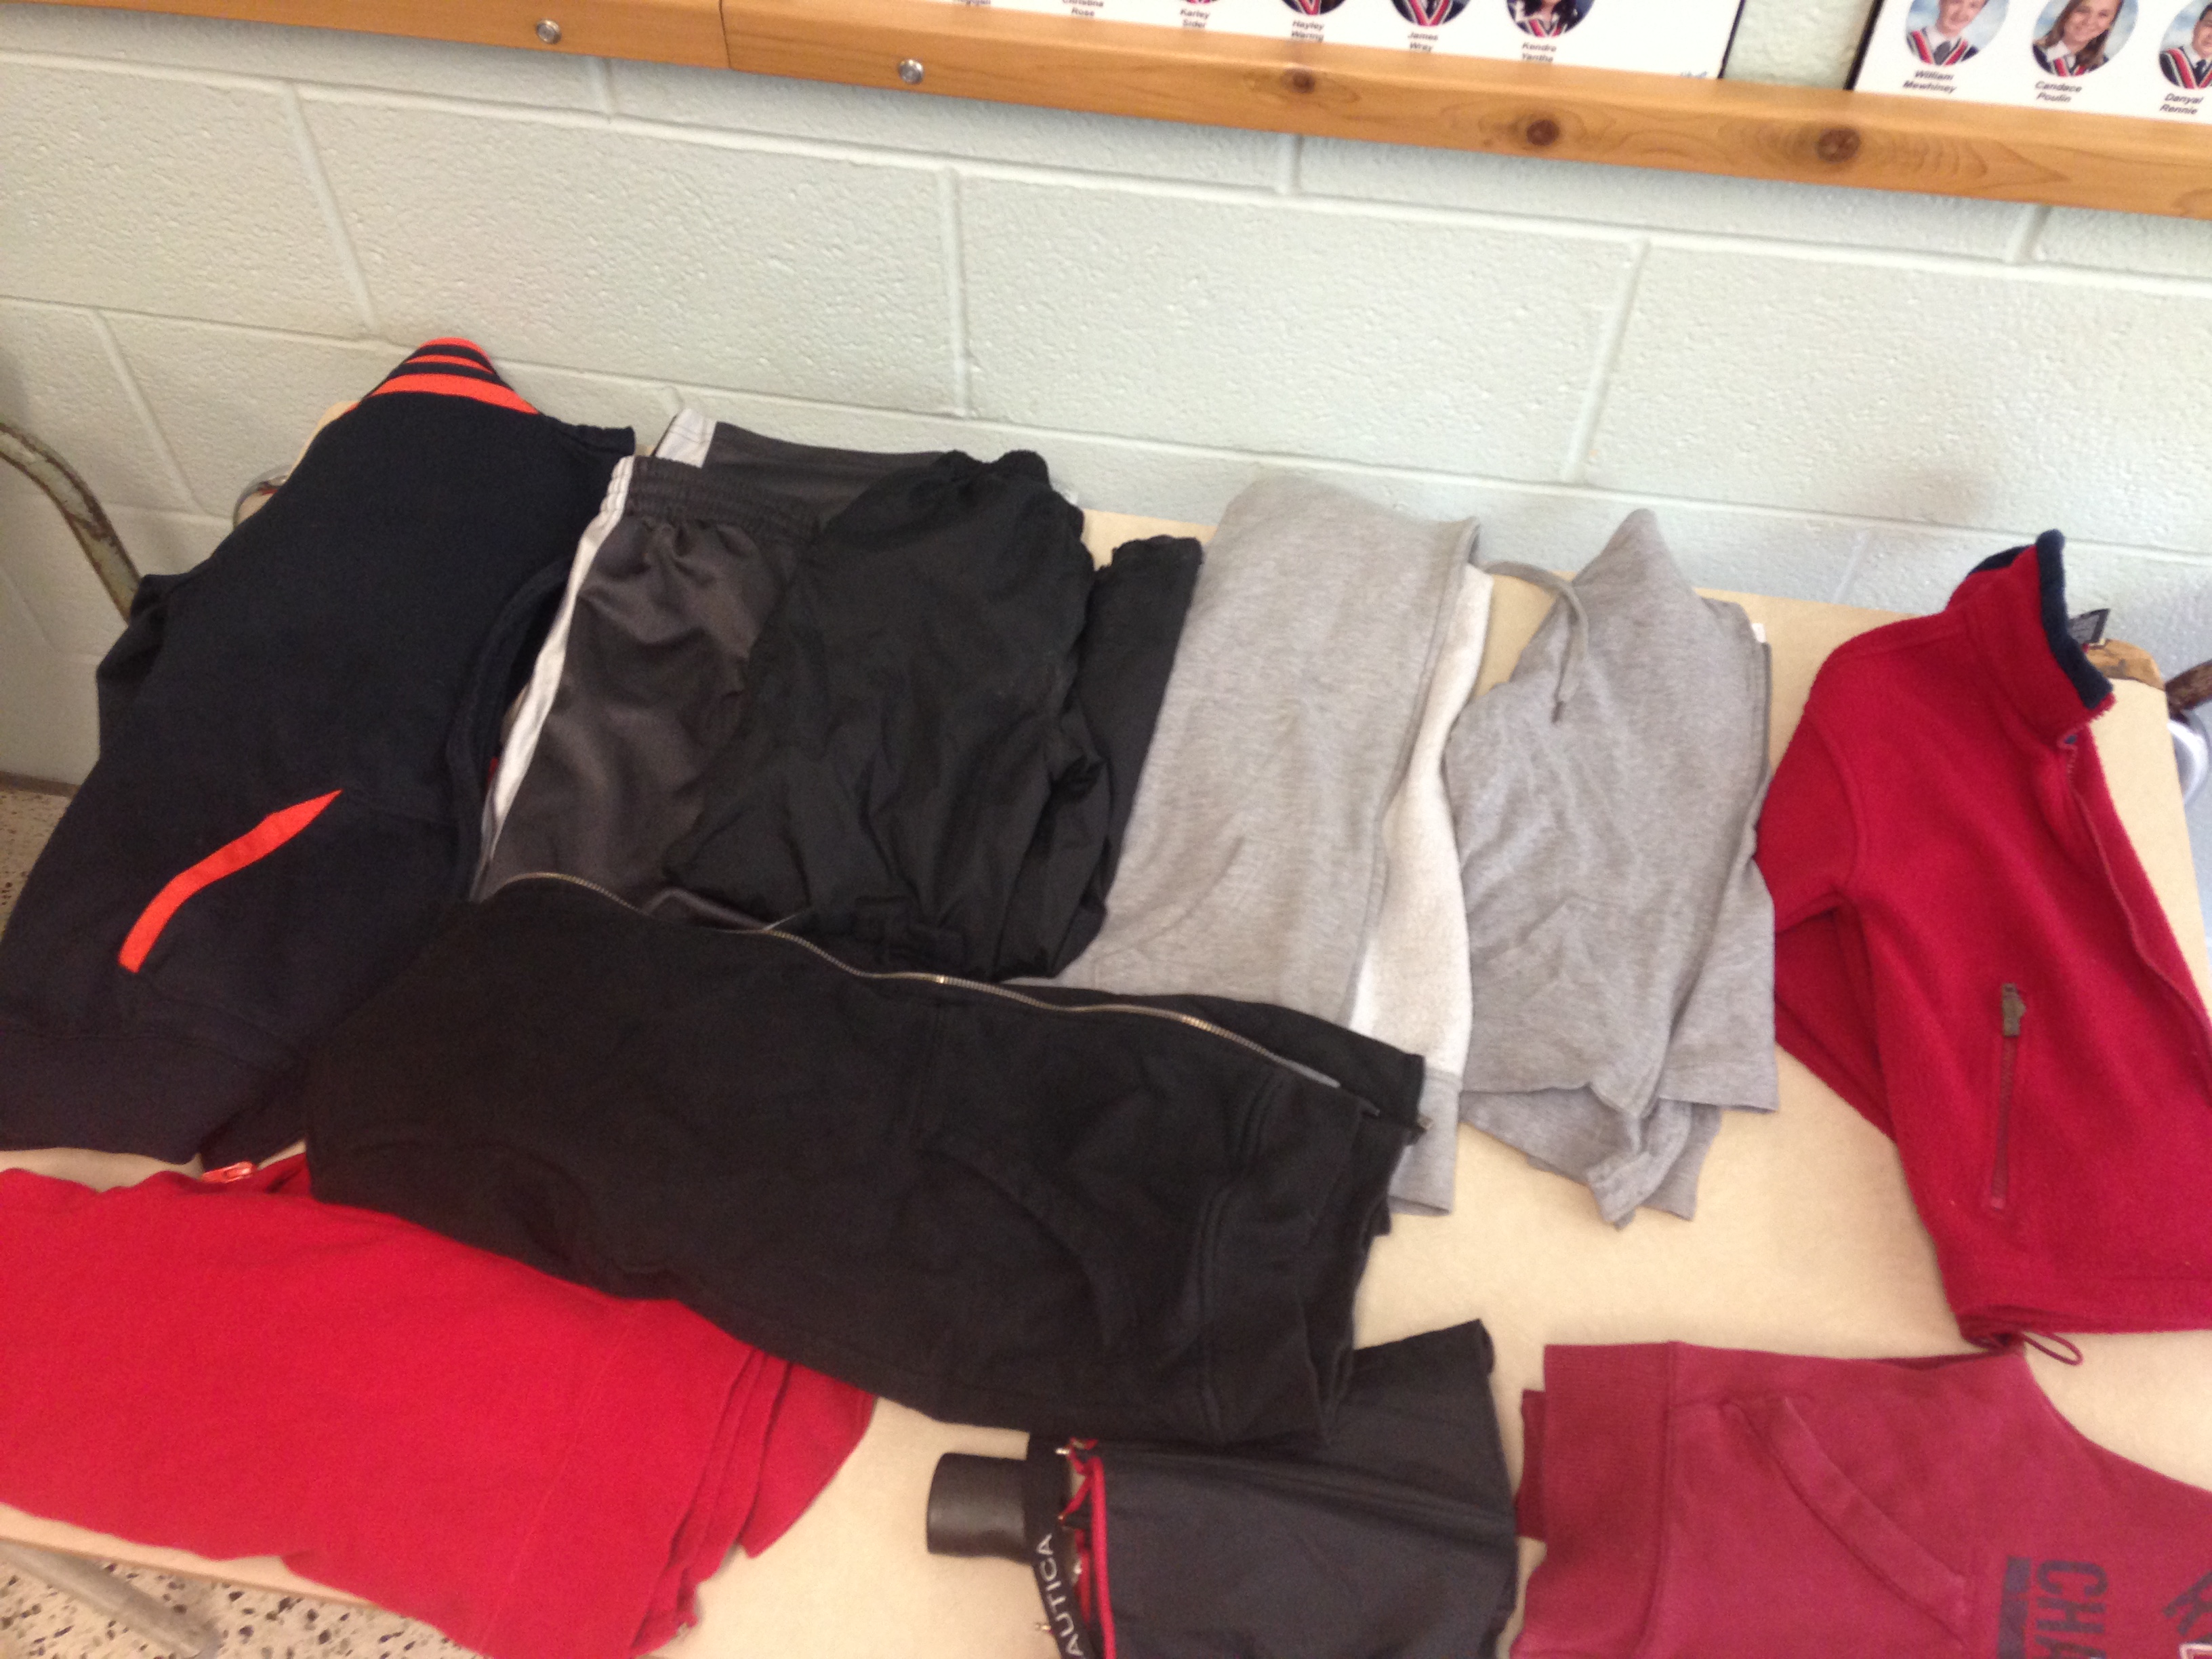 Check our Lost and Found (St. Jacobs Public School)